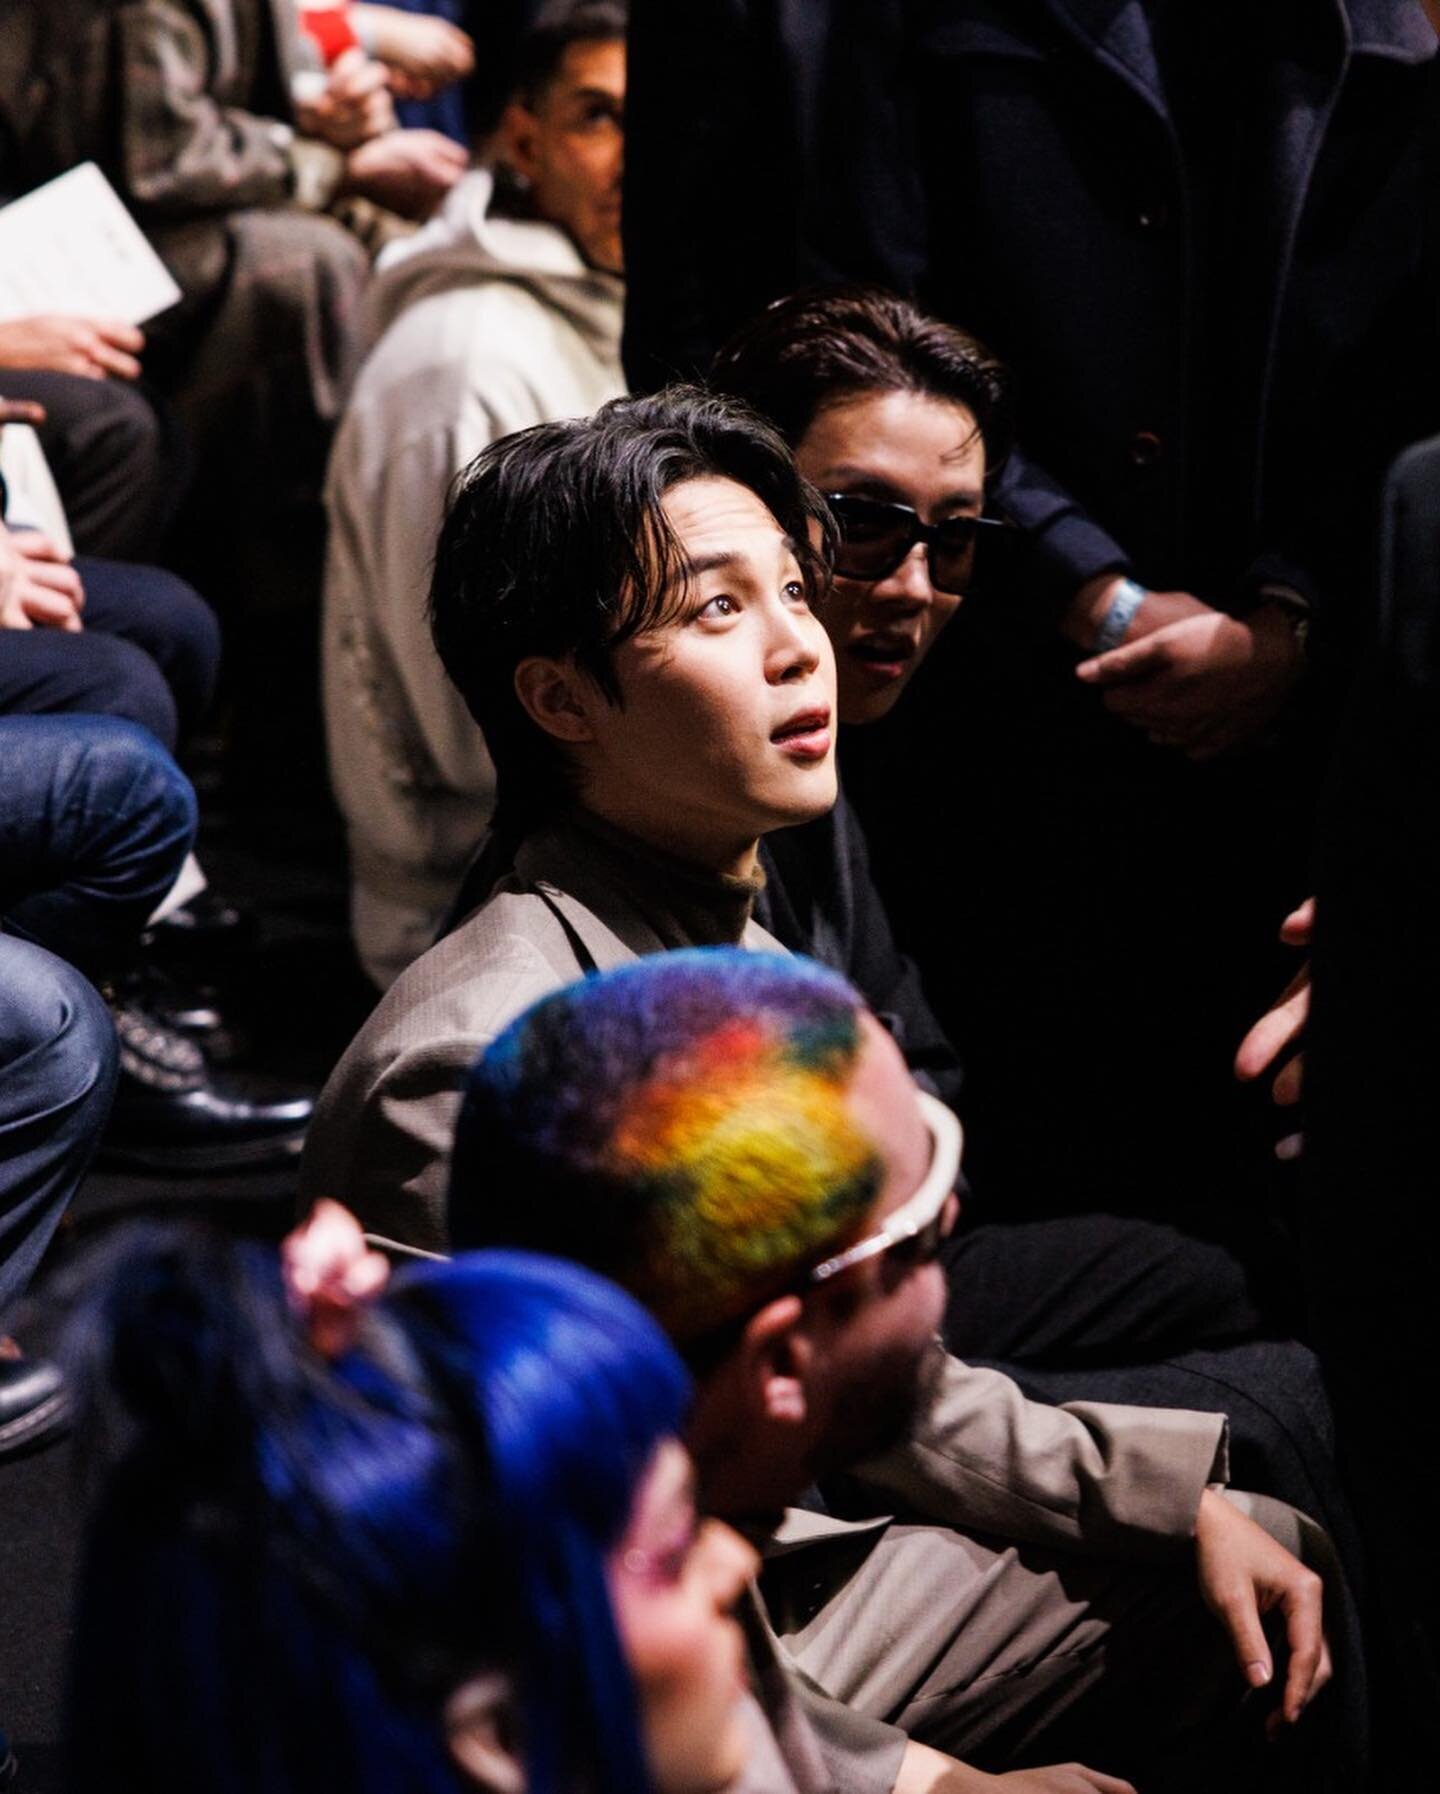 j-hope and Jimin take Paris for Louis Vuitton, Dior, and Hermes during  Fashion Week